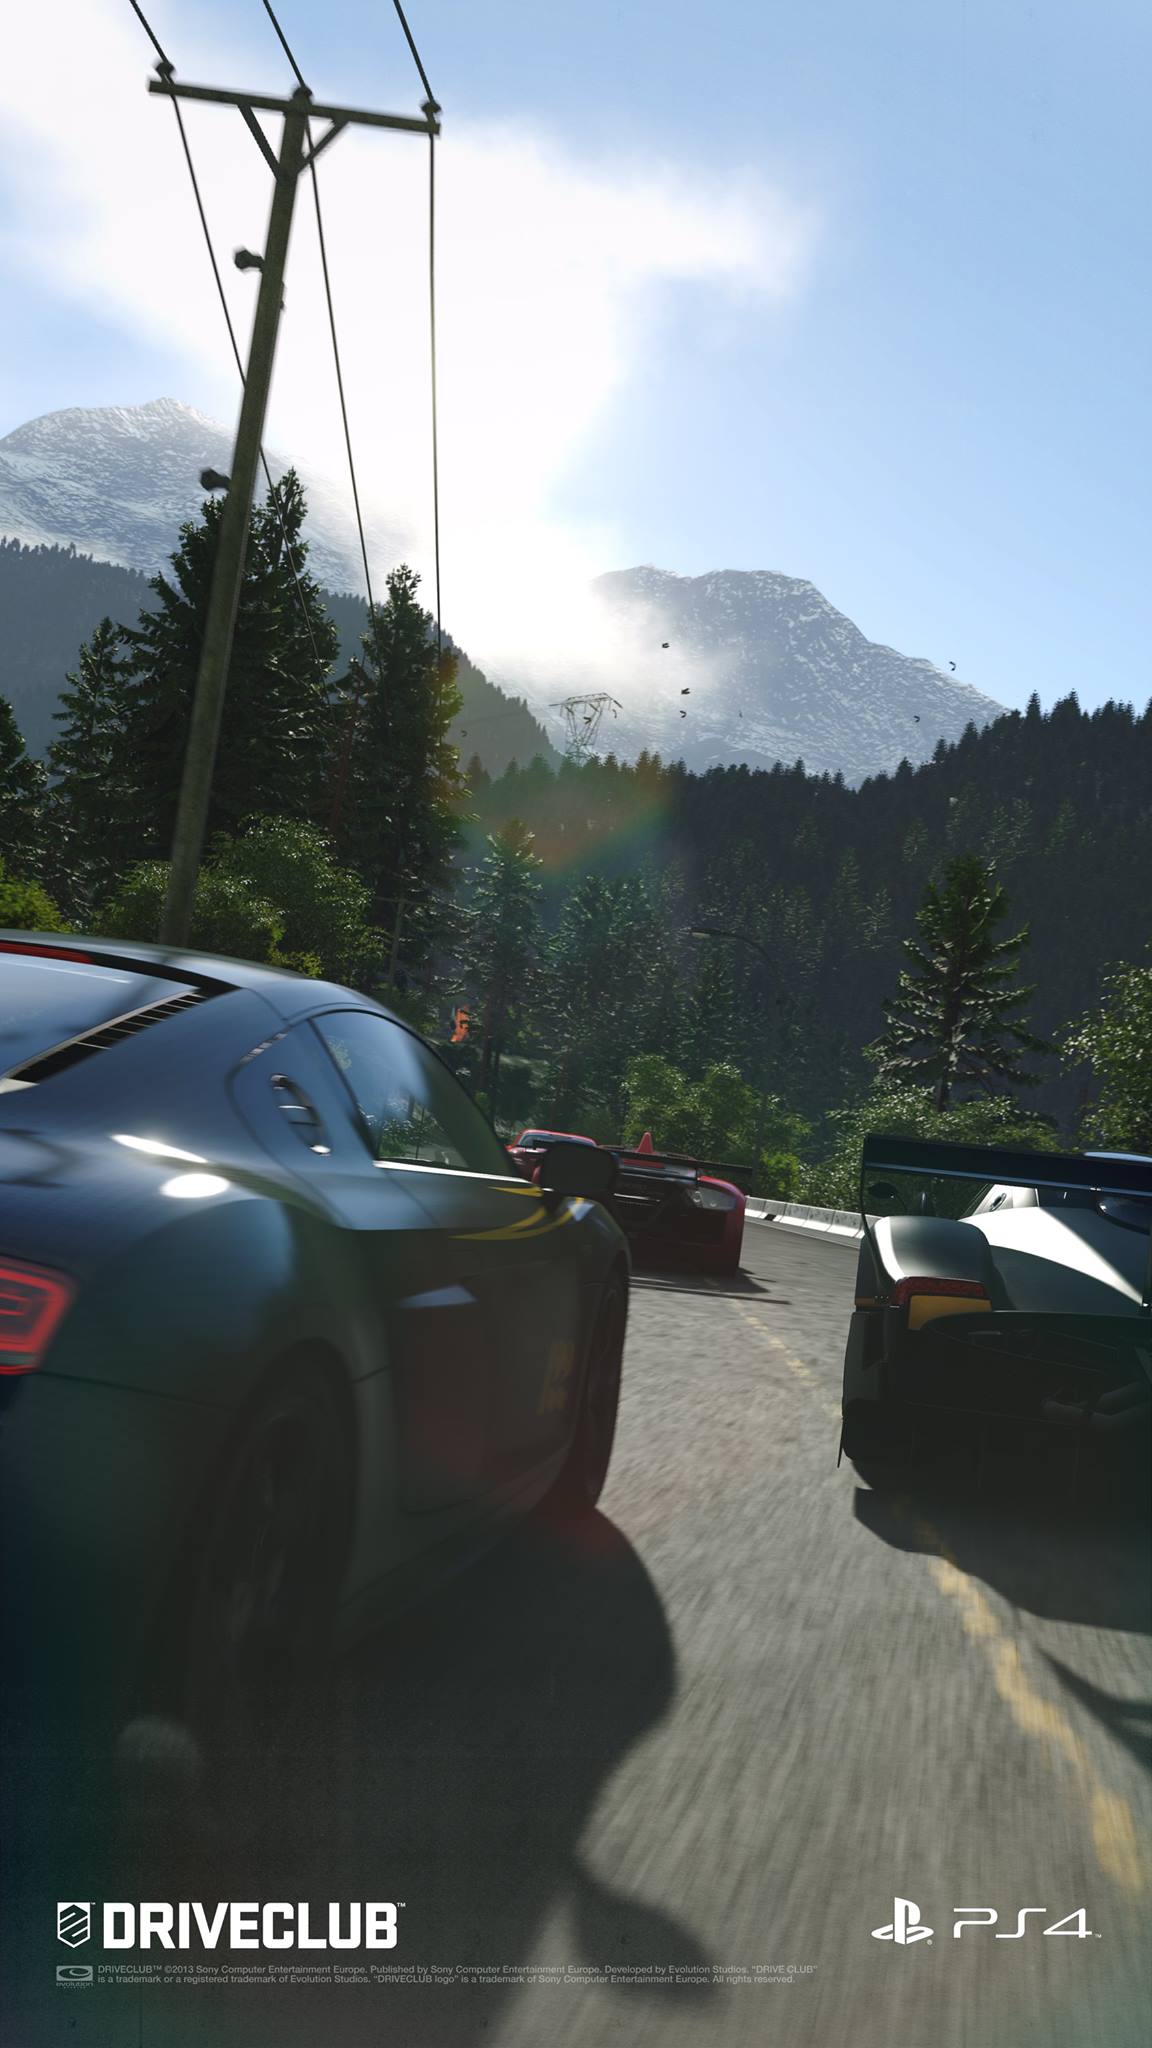 Sony Is Closing PS4 Racing Game Driveclub's Servers Next Year